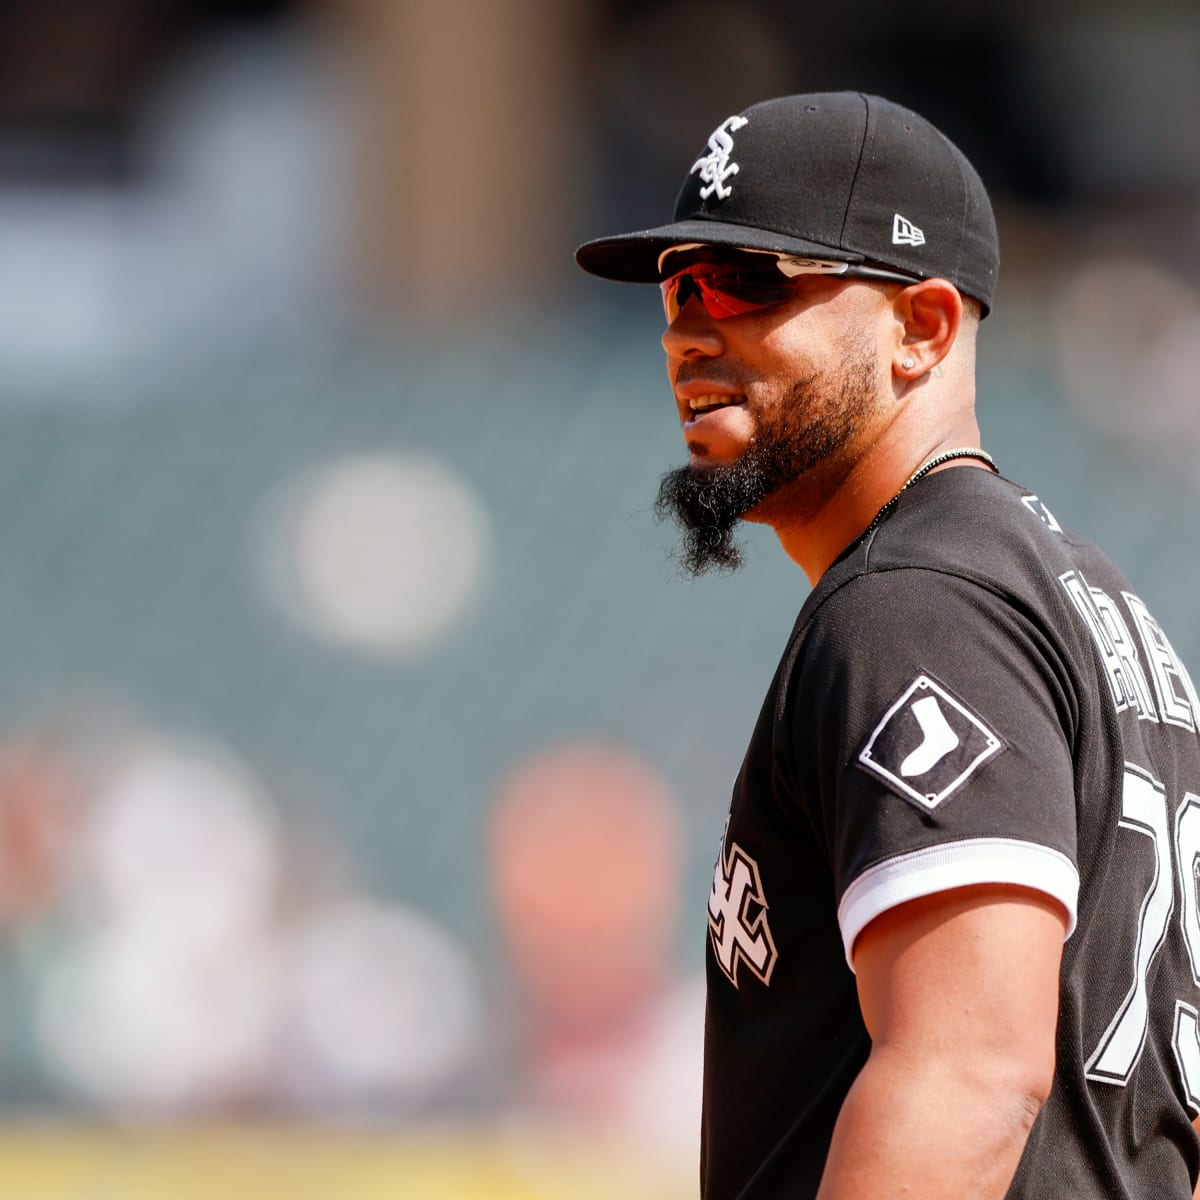 Chicago Cubs Will Have Interest in Pursuing Jose Abreu This